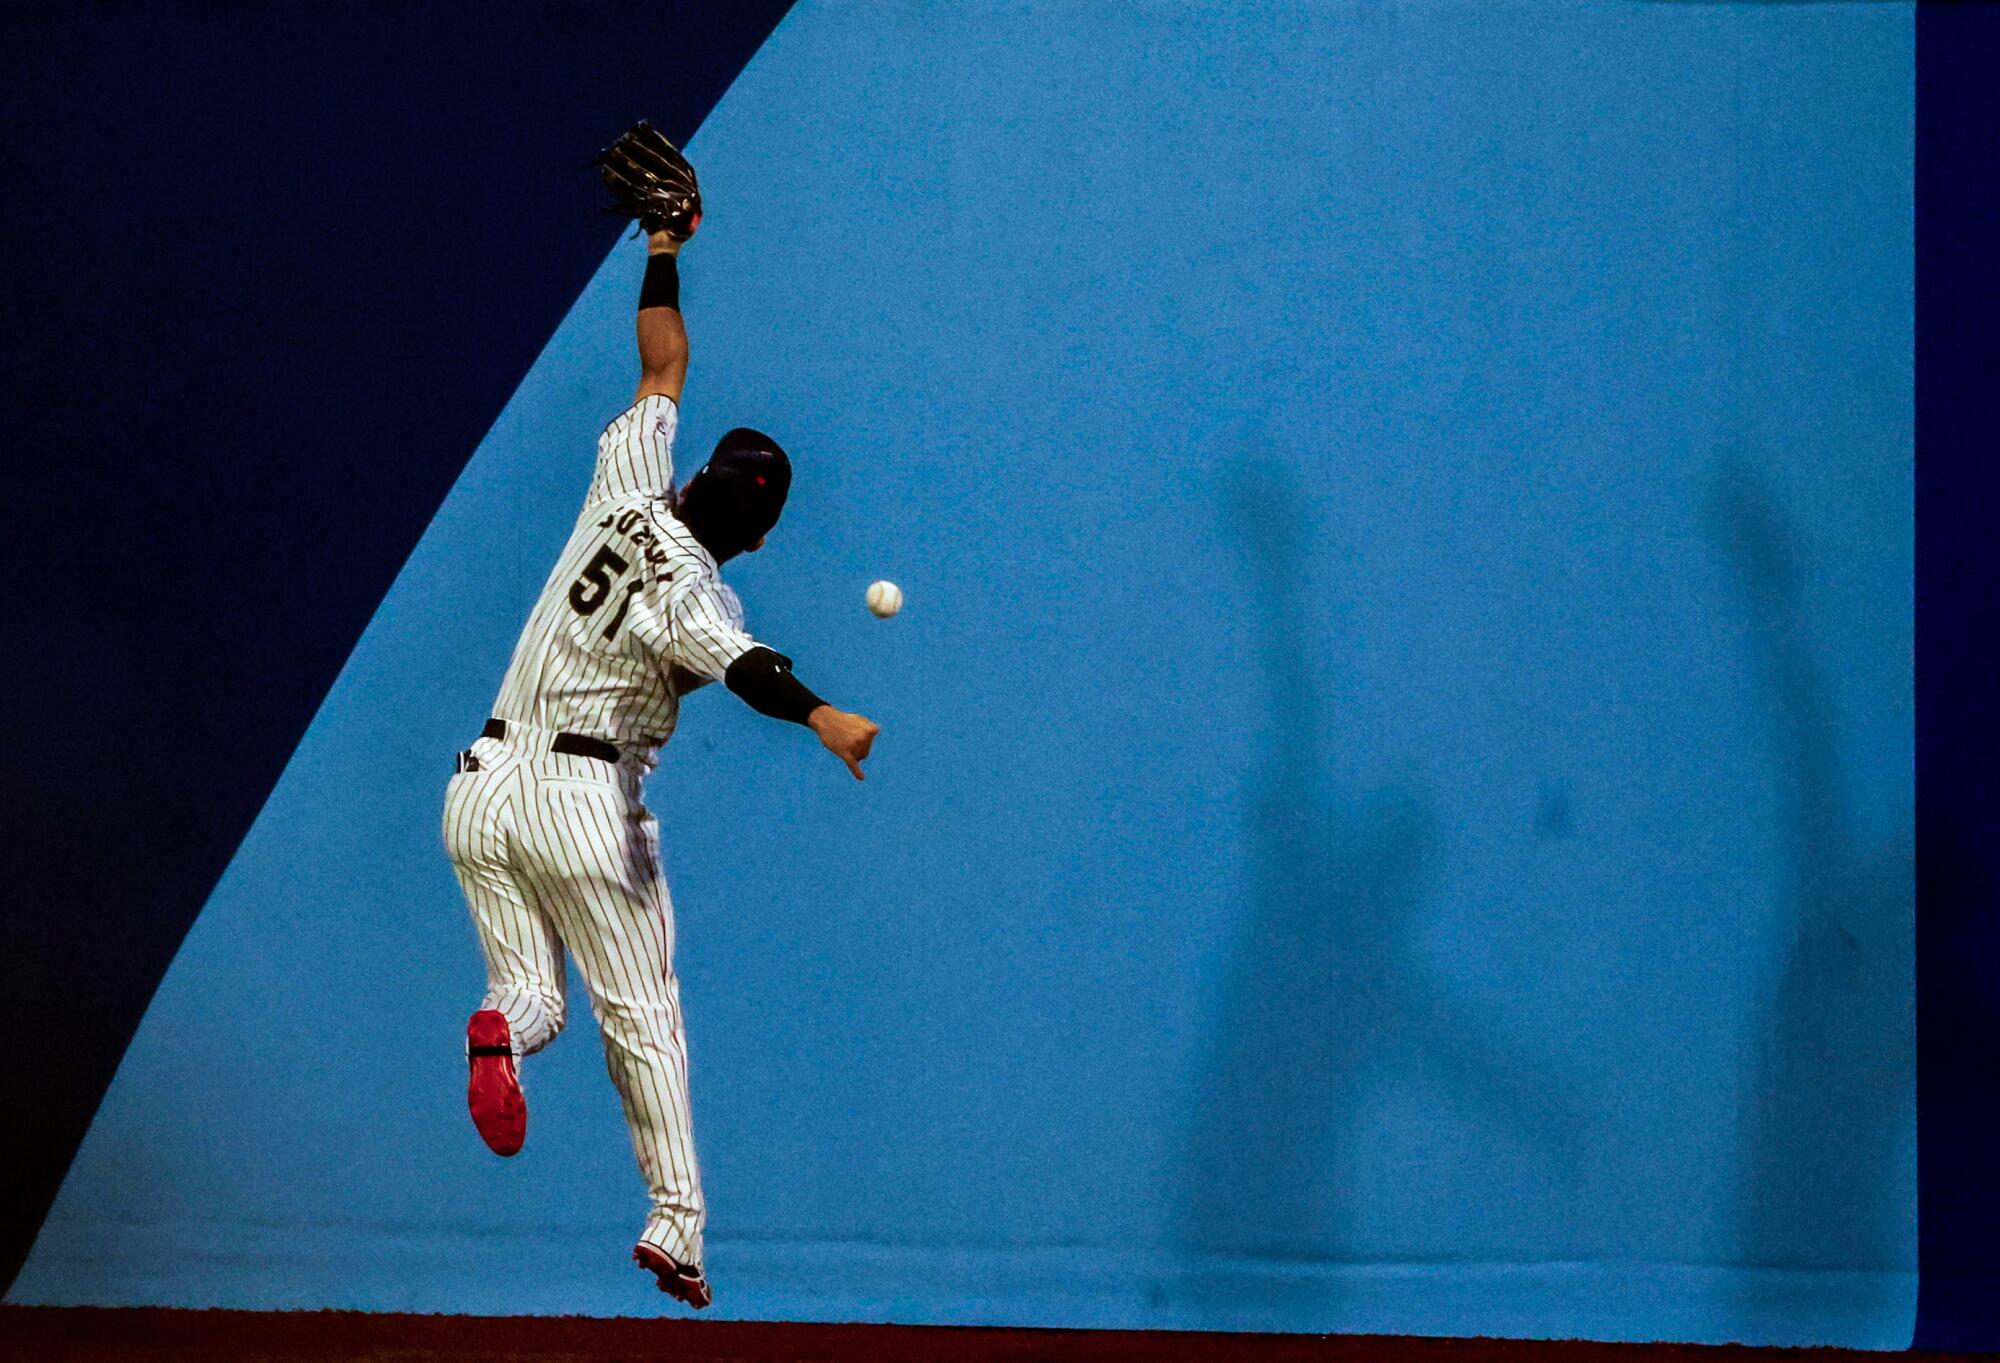 Team Japan outfielder Seiya Suzuki (51) can't catch up to double hit by Team South Korea outfielder Jung Hoo Lee (51)